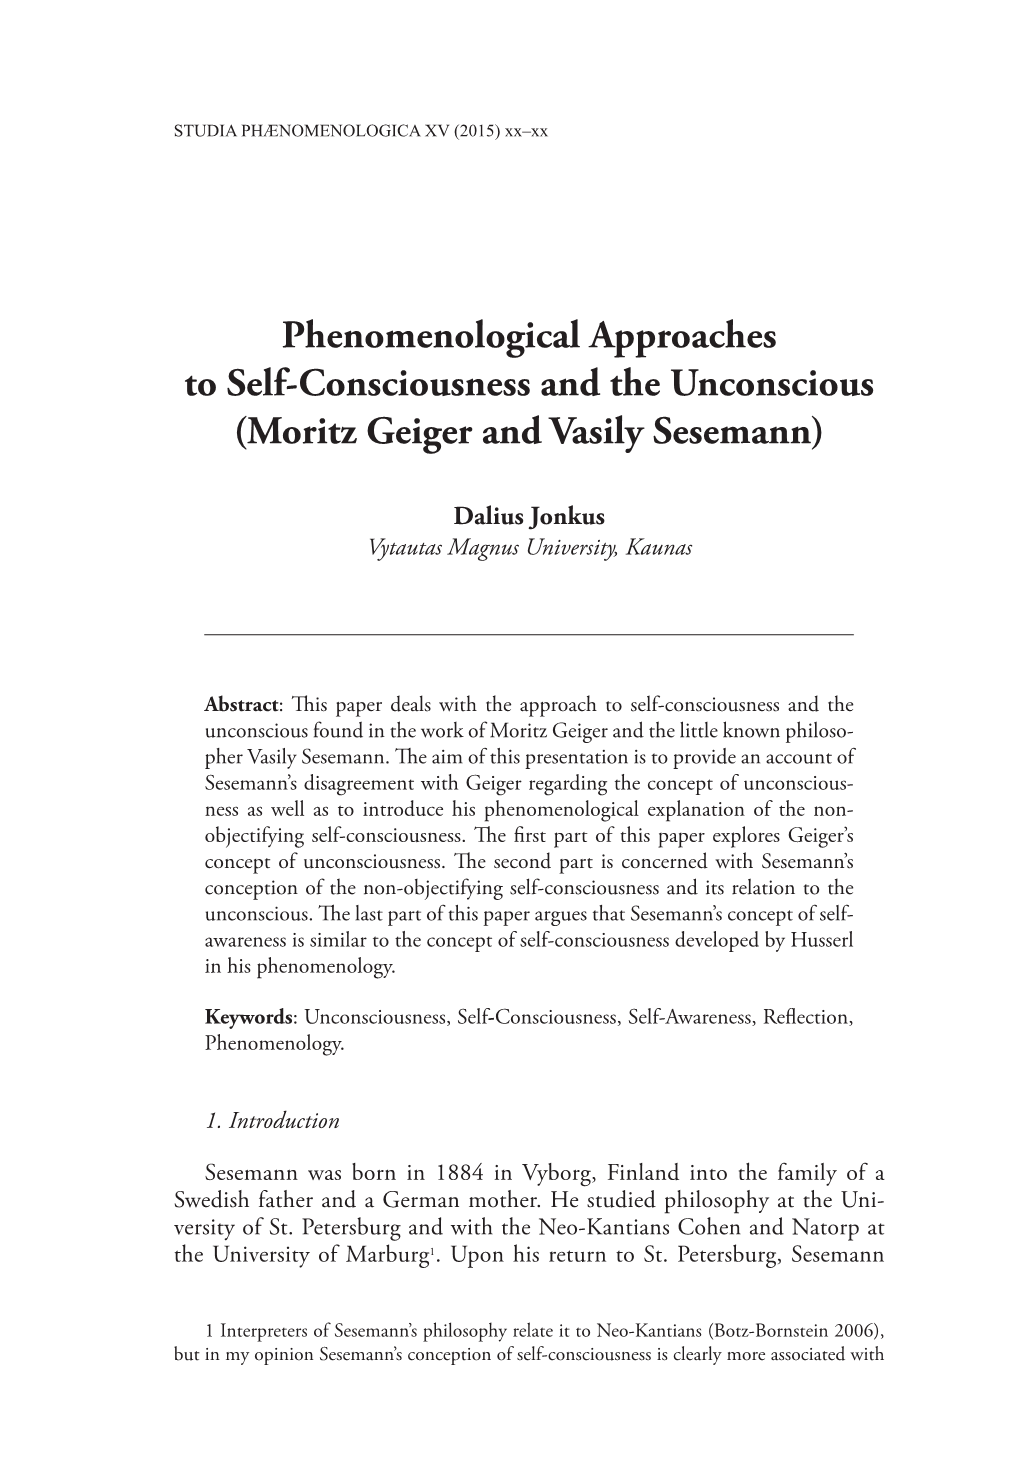 Phenomenological Approaches to Self-Consciousness and the Unconscious (Moritz Geiger and Vasily Sesemann)